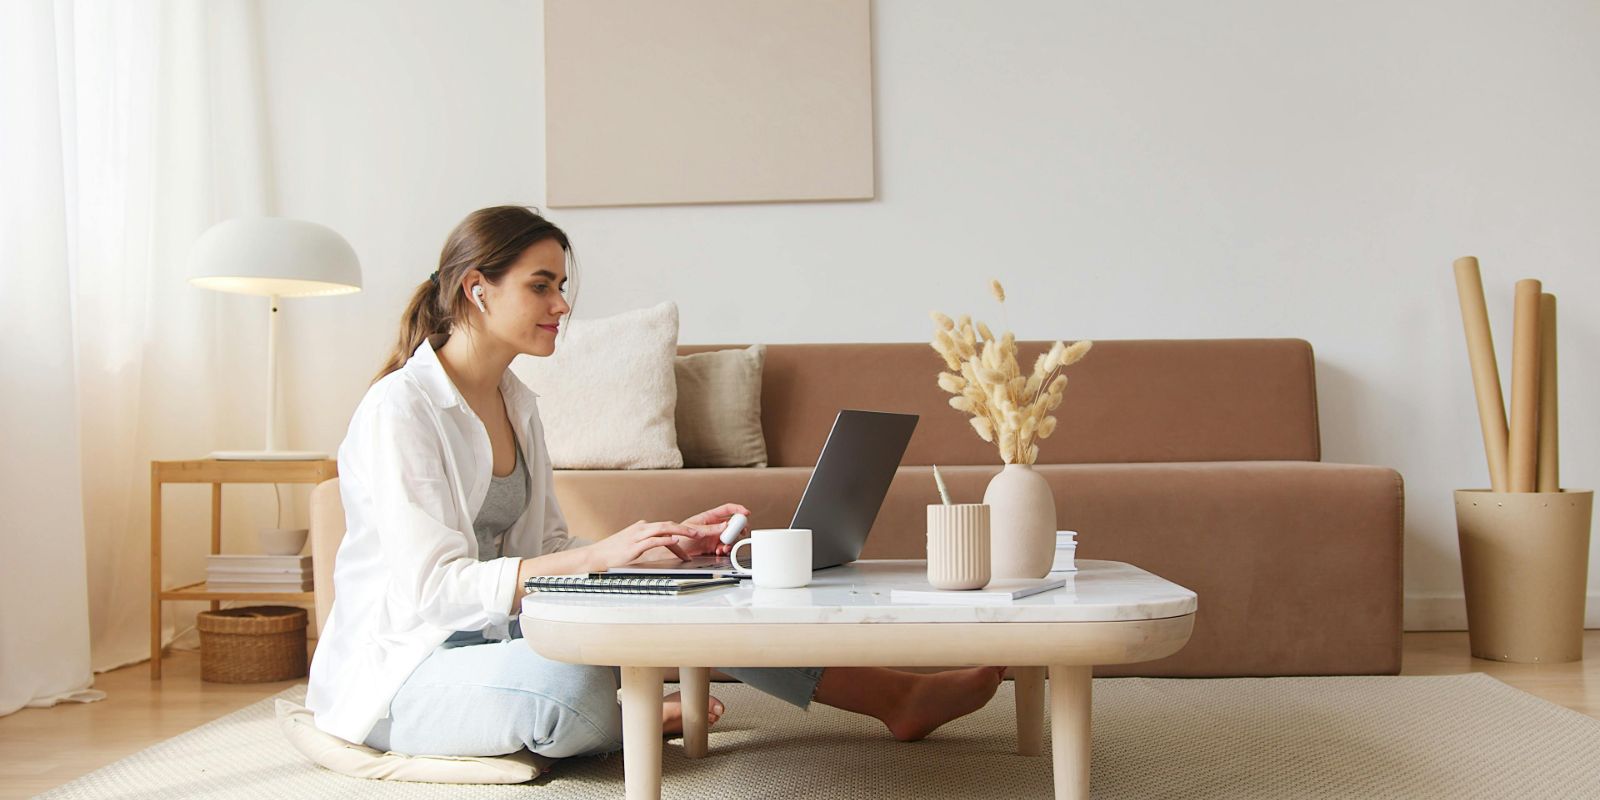 A focused individual is embracing the modern work-from-home lifestyle. Seated comfortably on the floor, they’re fully engaged with their laptop on a minimalistic coffee table. The space is bathed in natural light, creating a serene and productive ambiance perfect for concentrated tasks or online learning. The decor, with its muted tones and natural textures, suggests a penchant for contemporary, clutter-free living